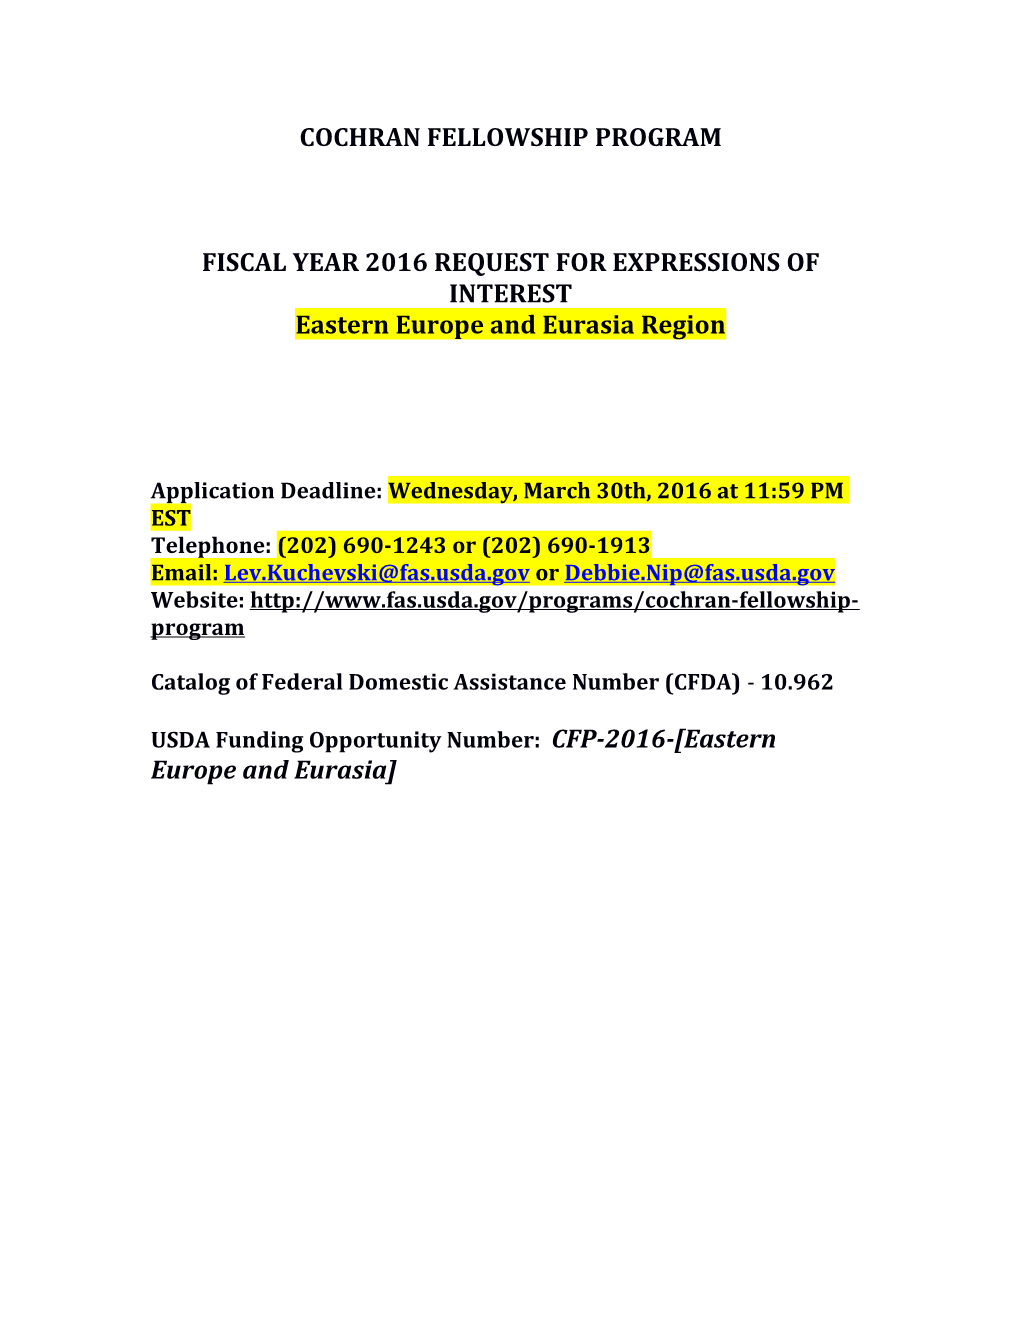 Fiscal Year 2016 Request for Expressions of Interest